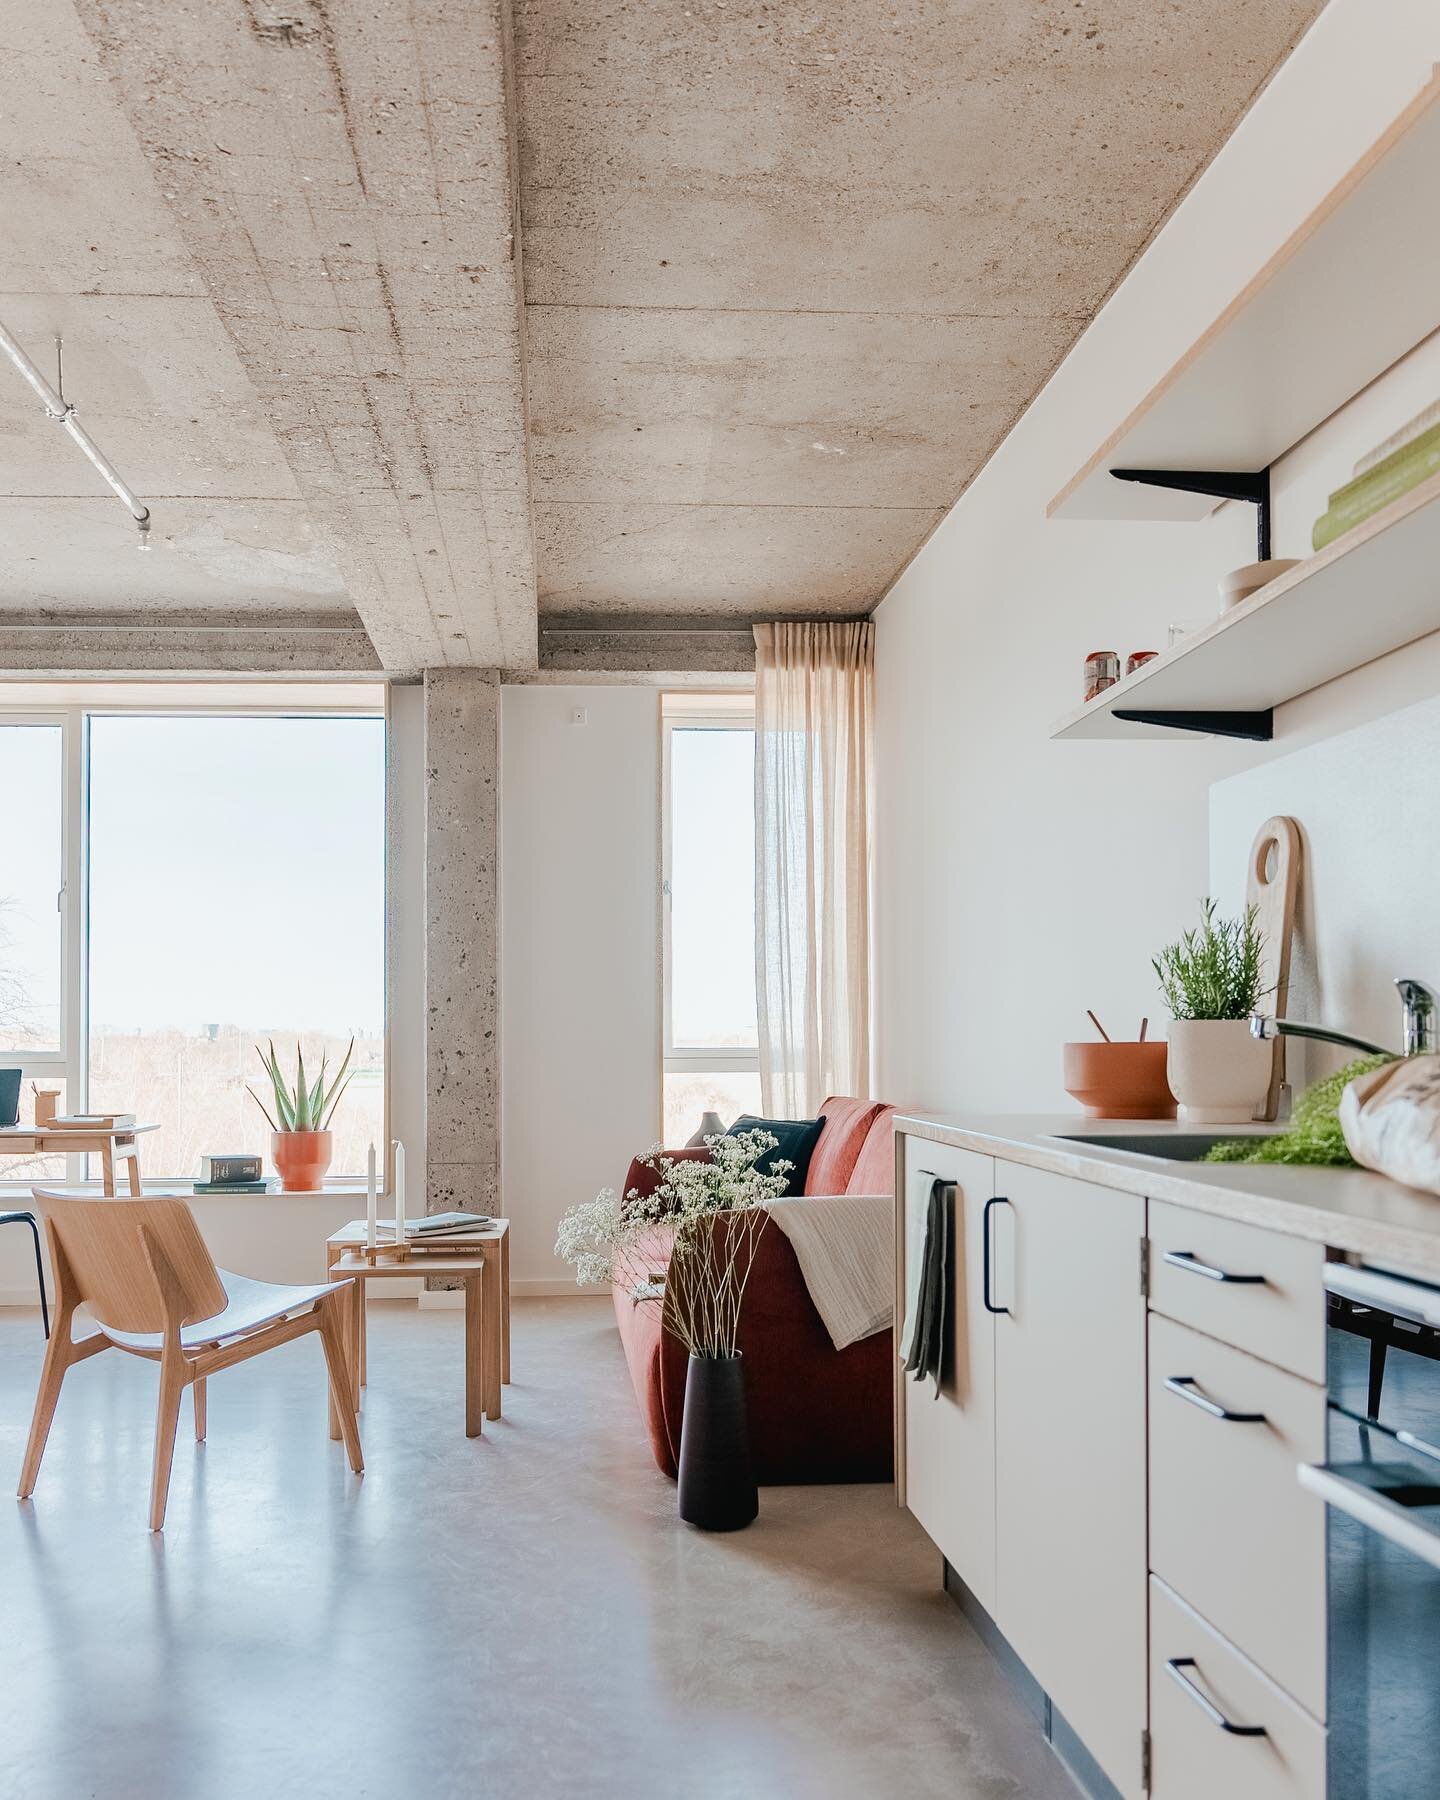 No matter if you use a WorkStudio as a place to work or live it always comes with a private kitchen and bathroom. 

Working or living at Siljangade will give you free access to all of the shared facilities like fitness, office and meeting rooms, roof